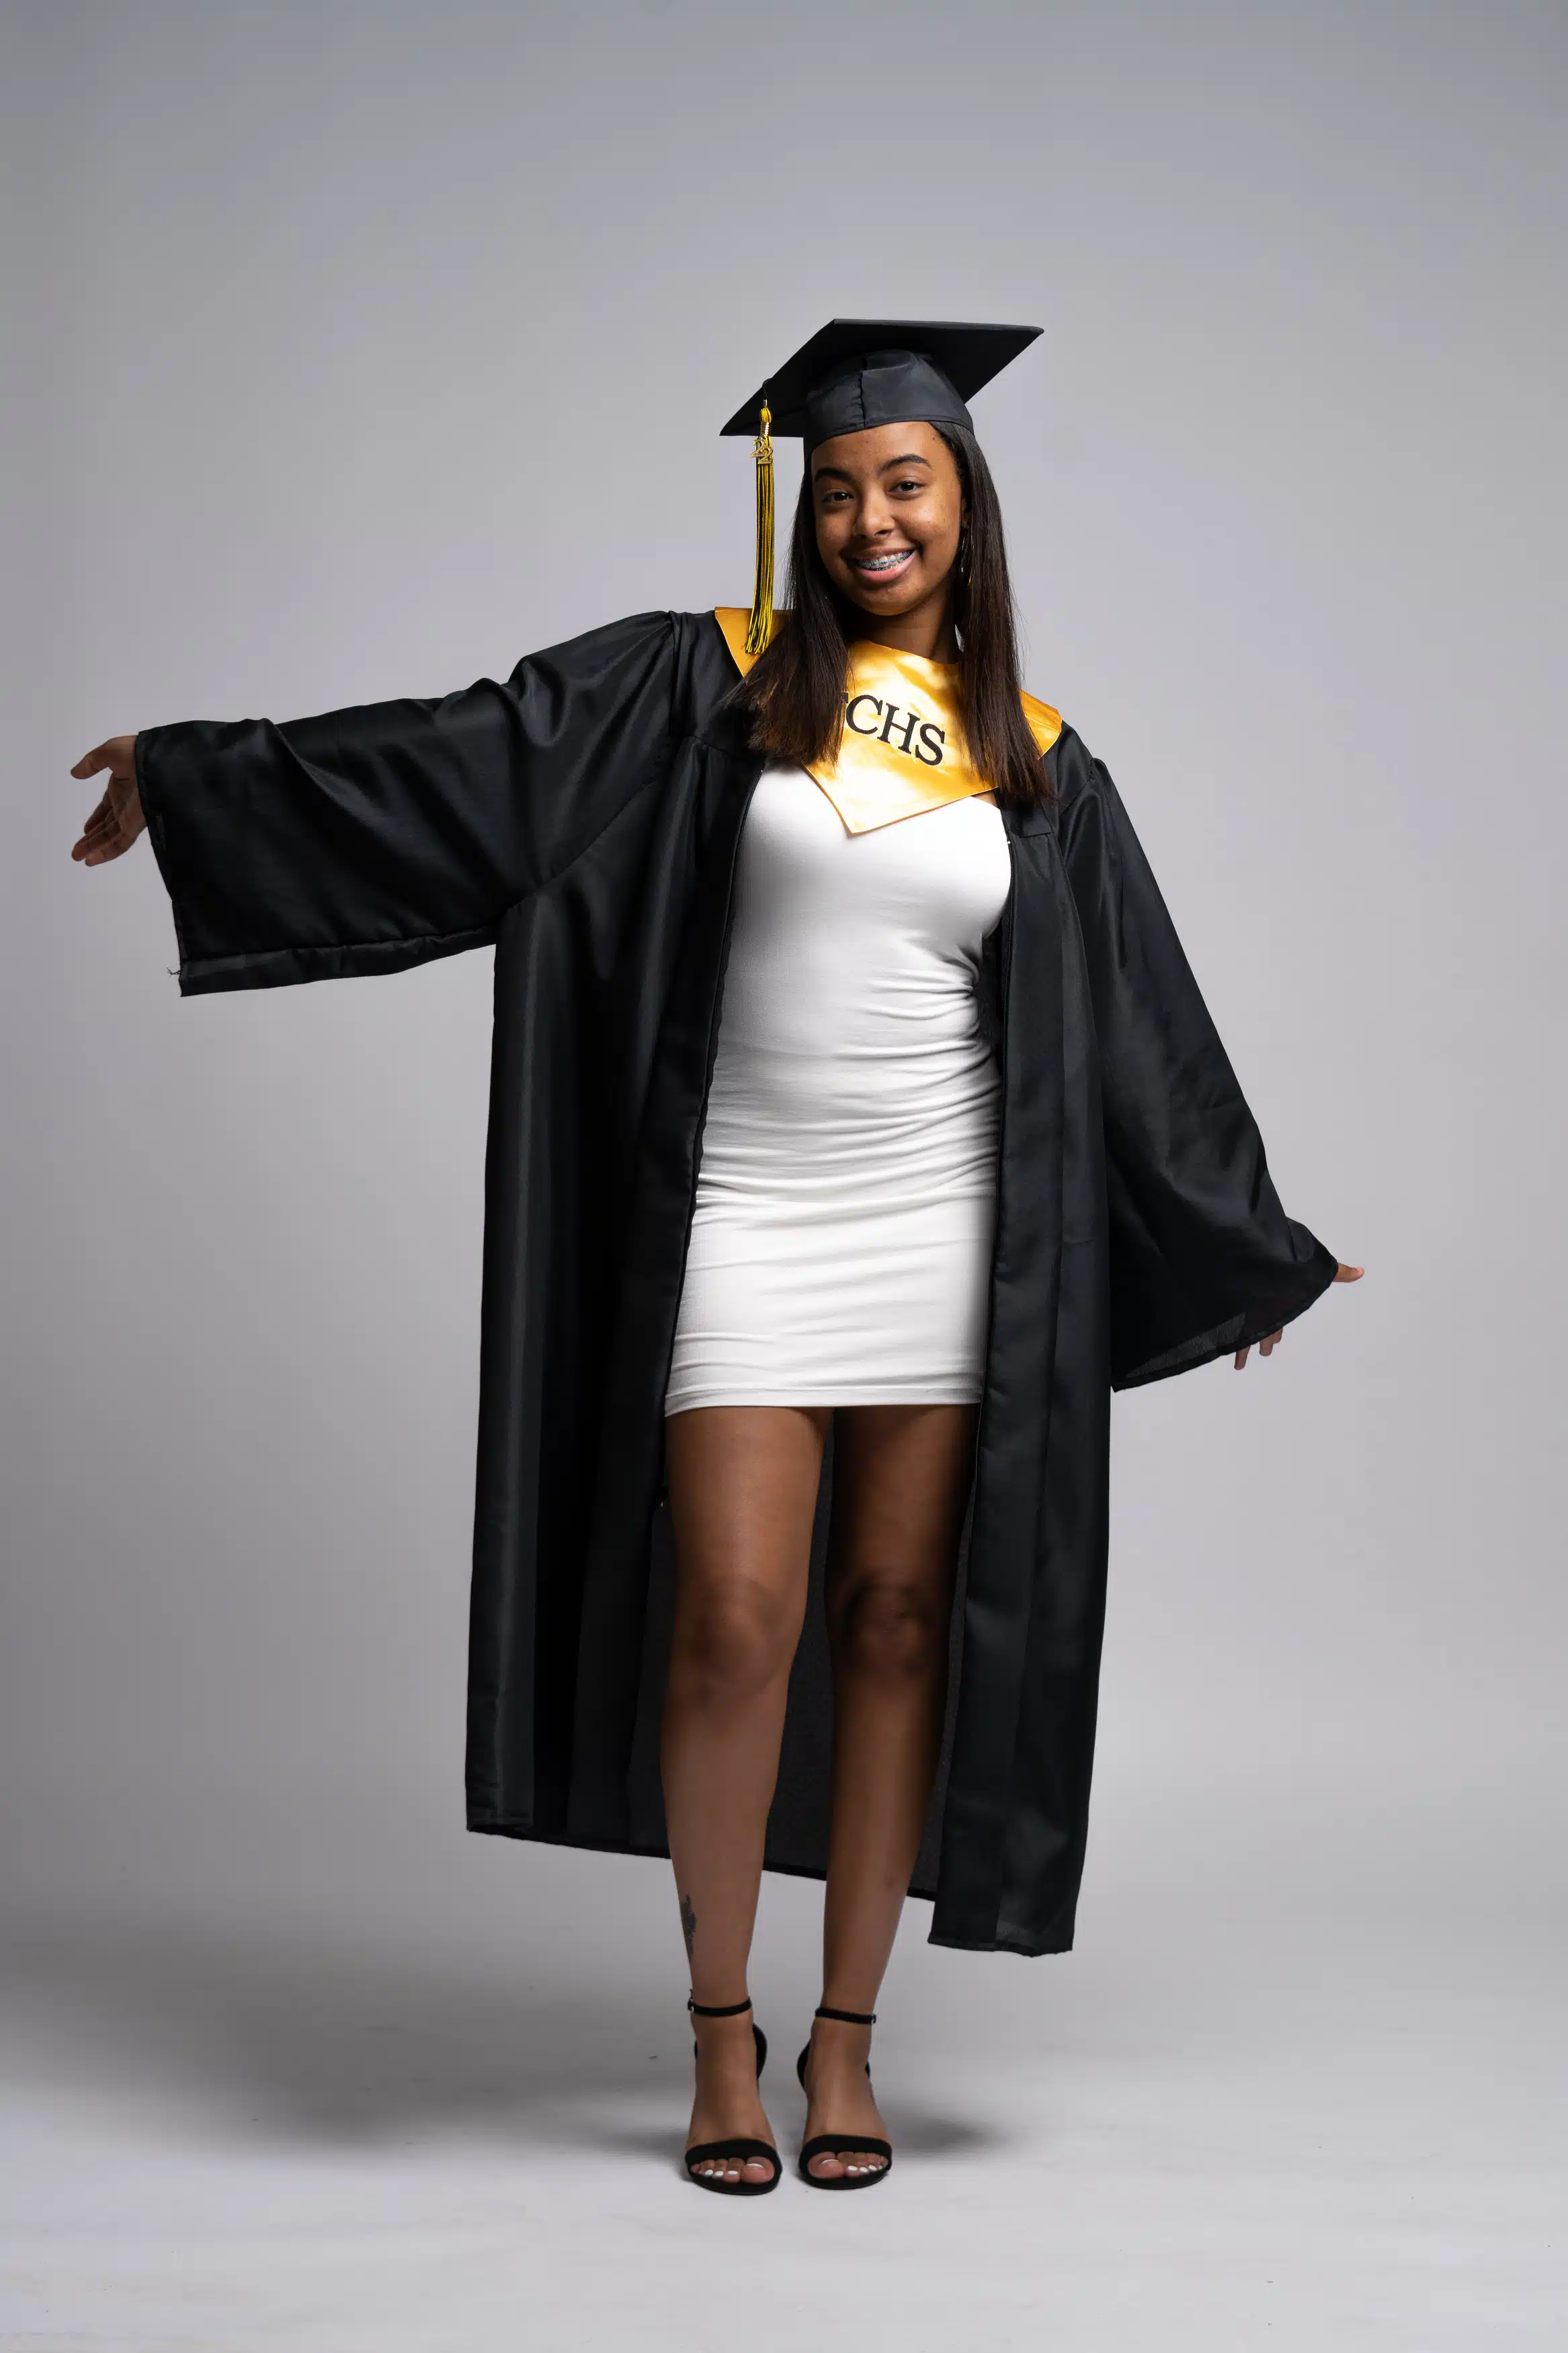 Woman wearing her cap and gown for East Carolina University (ECU) and posing for her graduation photos. While being in a photography studio located in greenville, nc